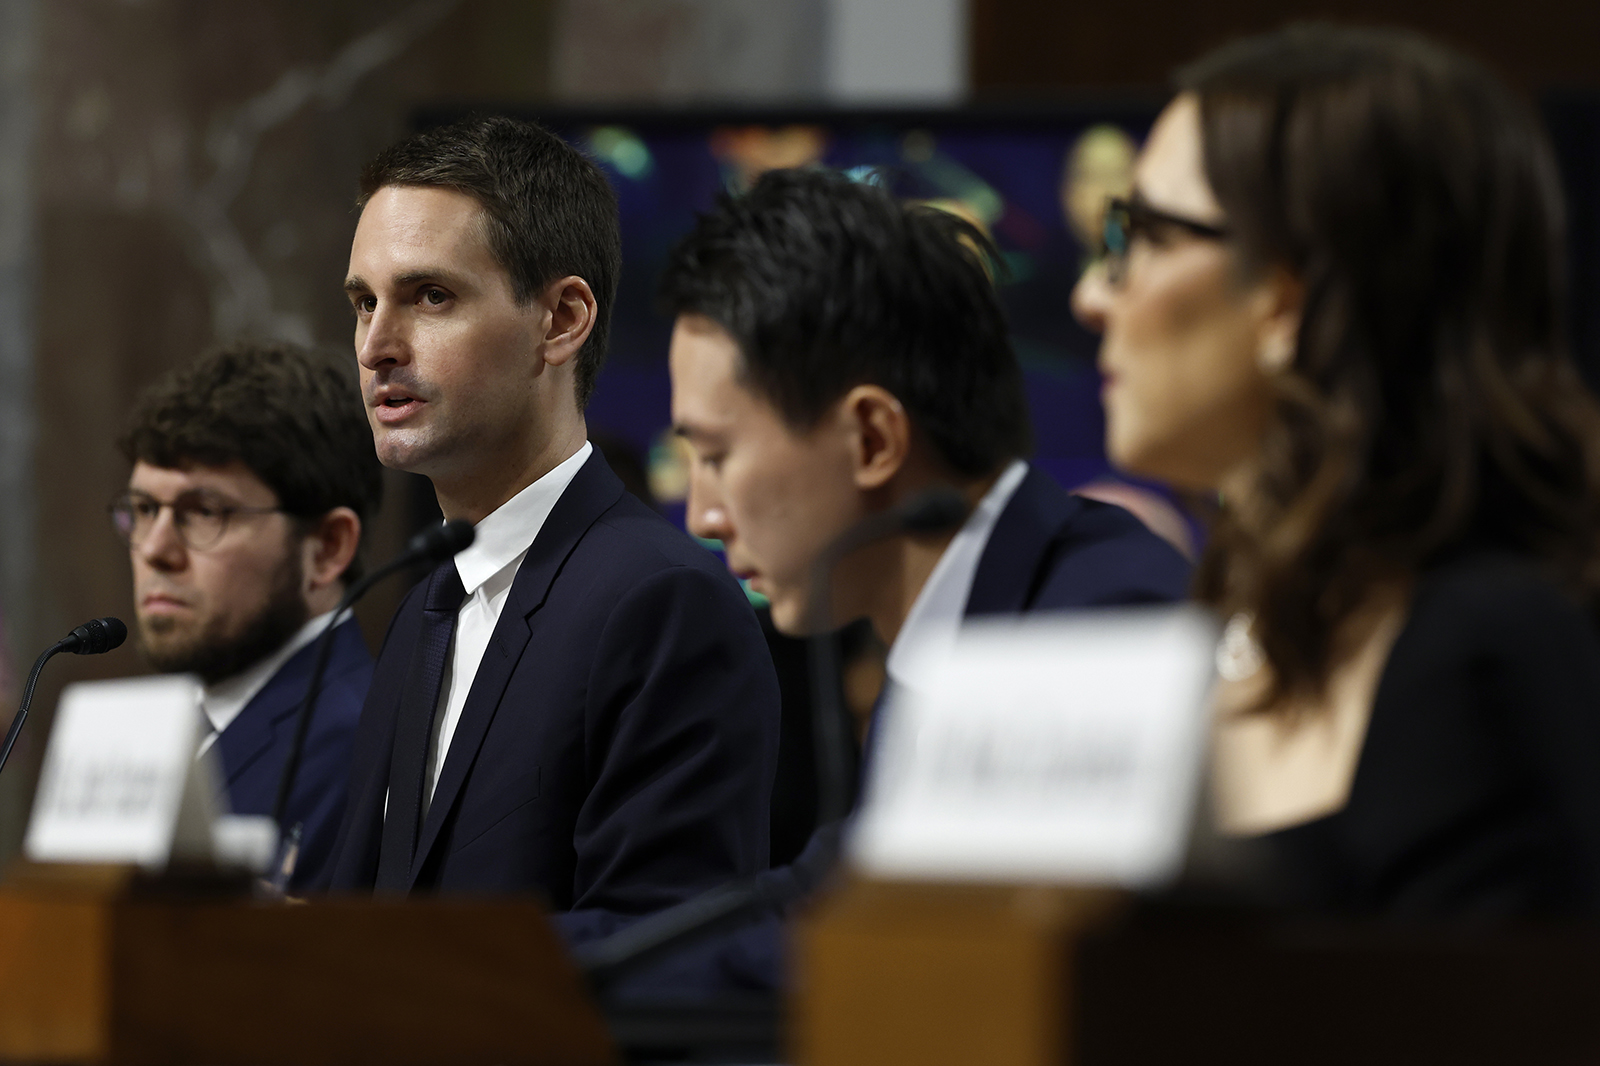 (L-R) Jason Citron, CEO of Discord, Evan Spiegel, CEO of Snap, Shou Zi Chew, CEO of TikTok, Linda Yaccarino, CEO of X during the hearing today.